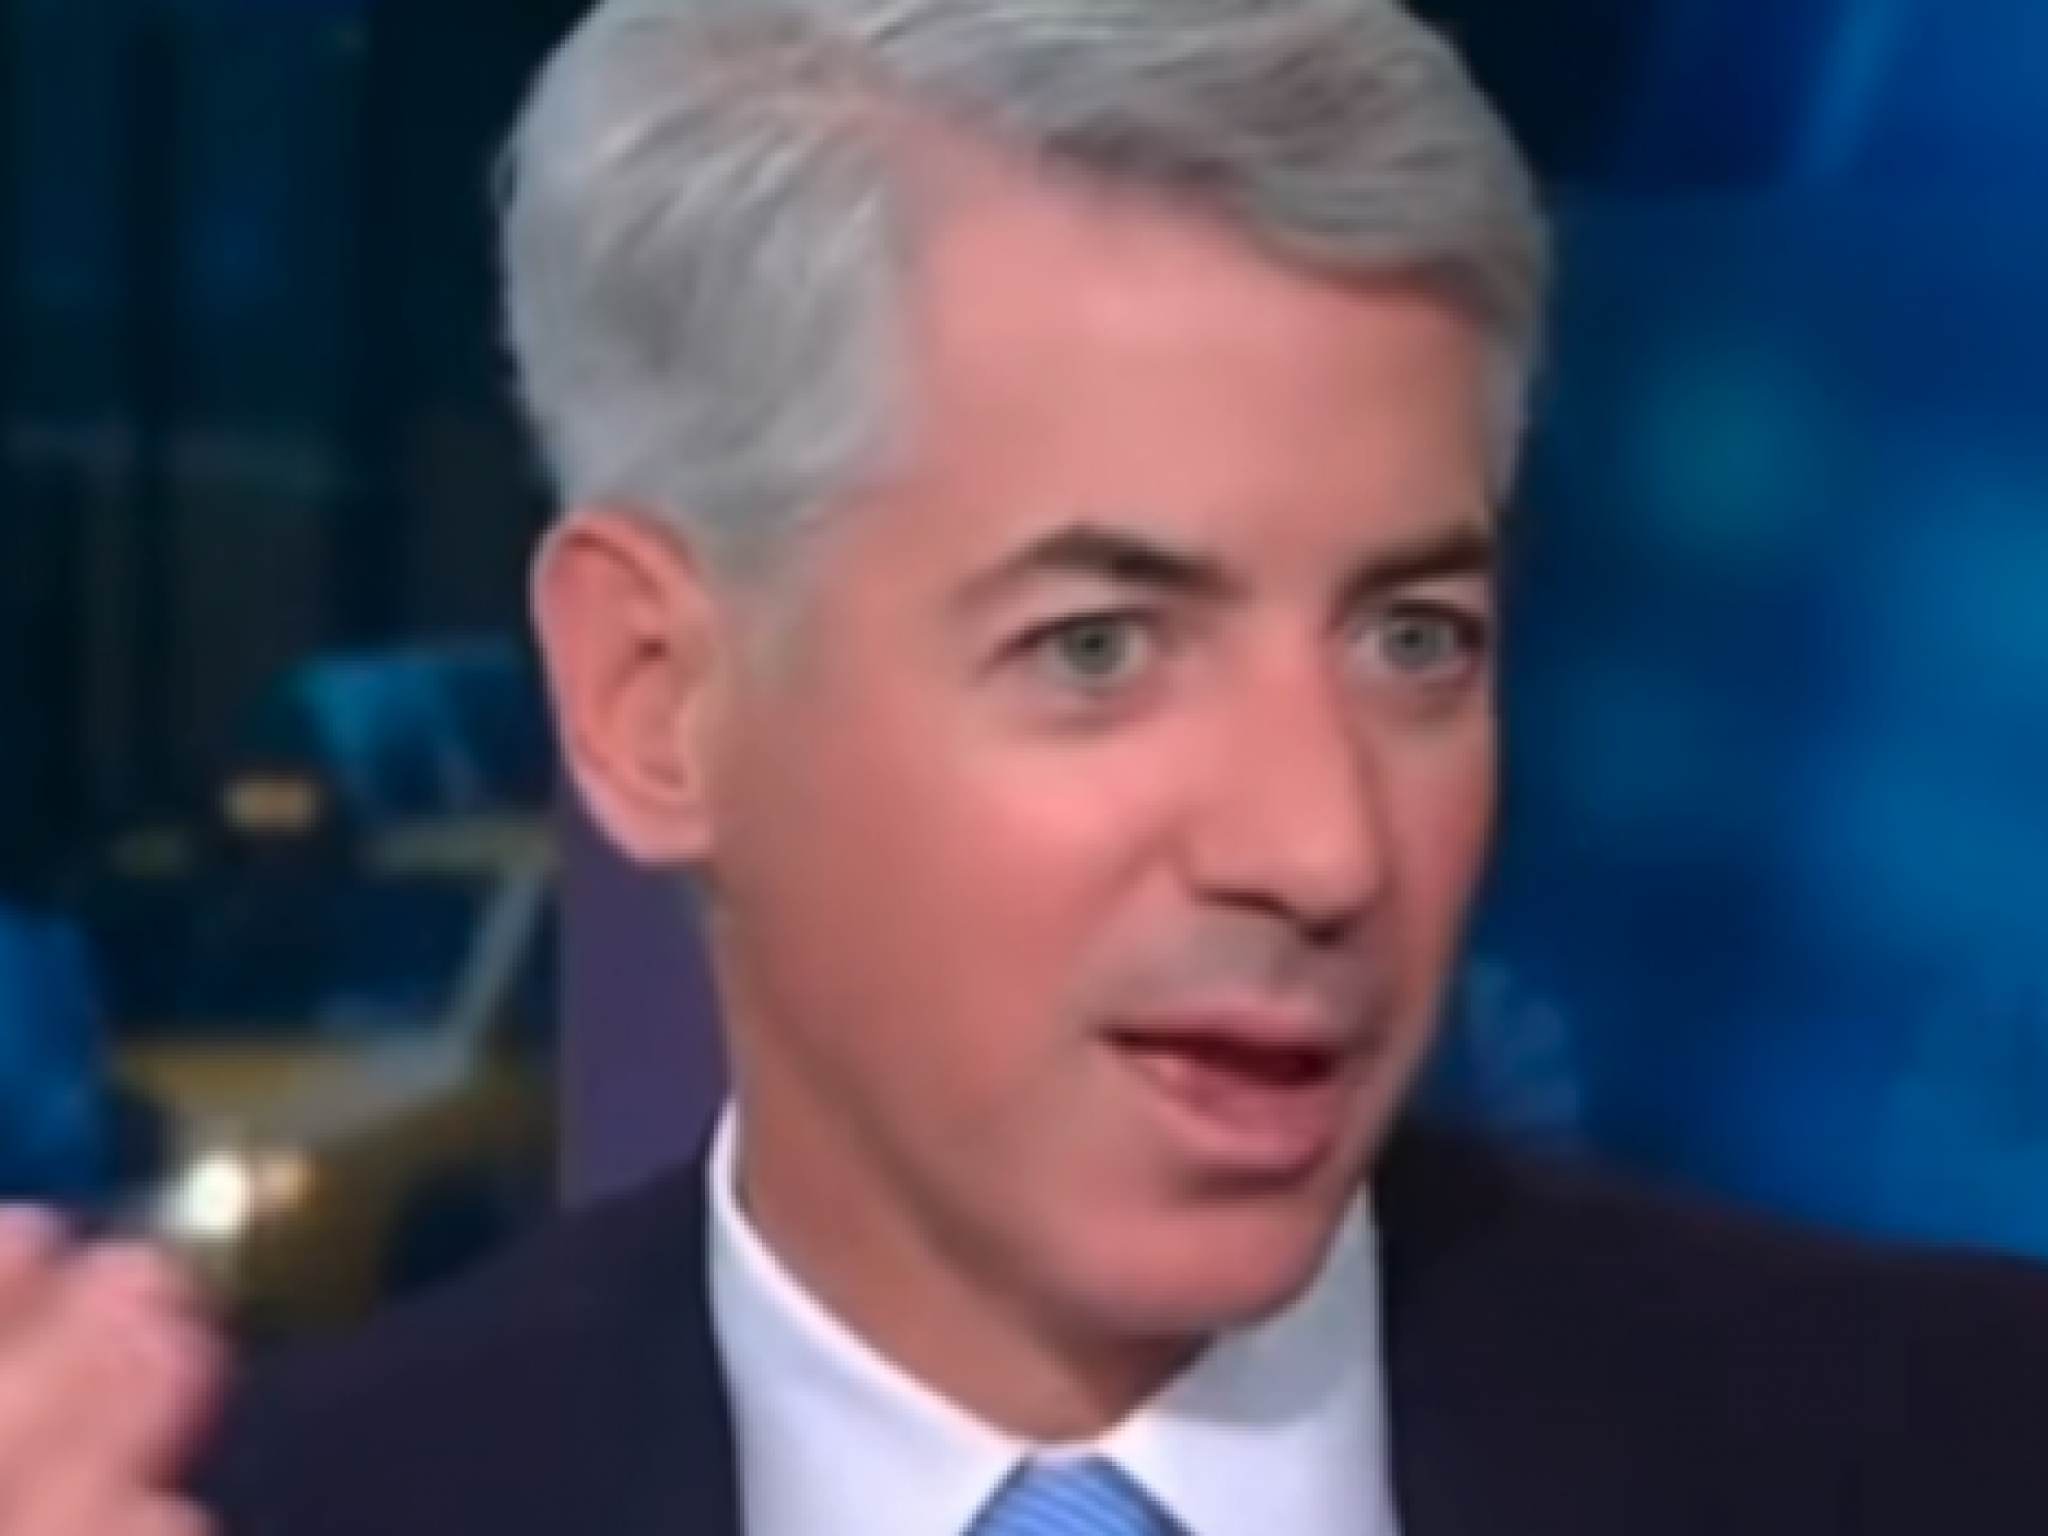  bill-ackman-facing-new-lawsuit-after-failed-spac-deal 